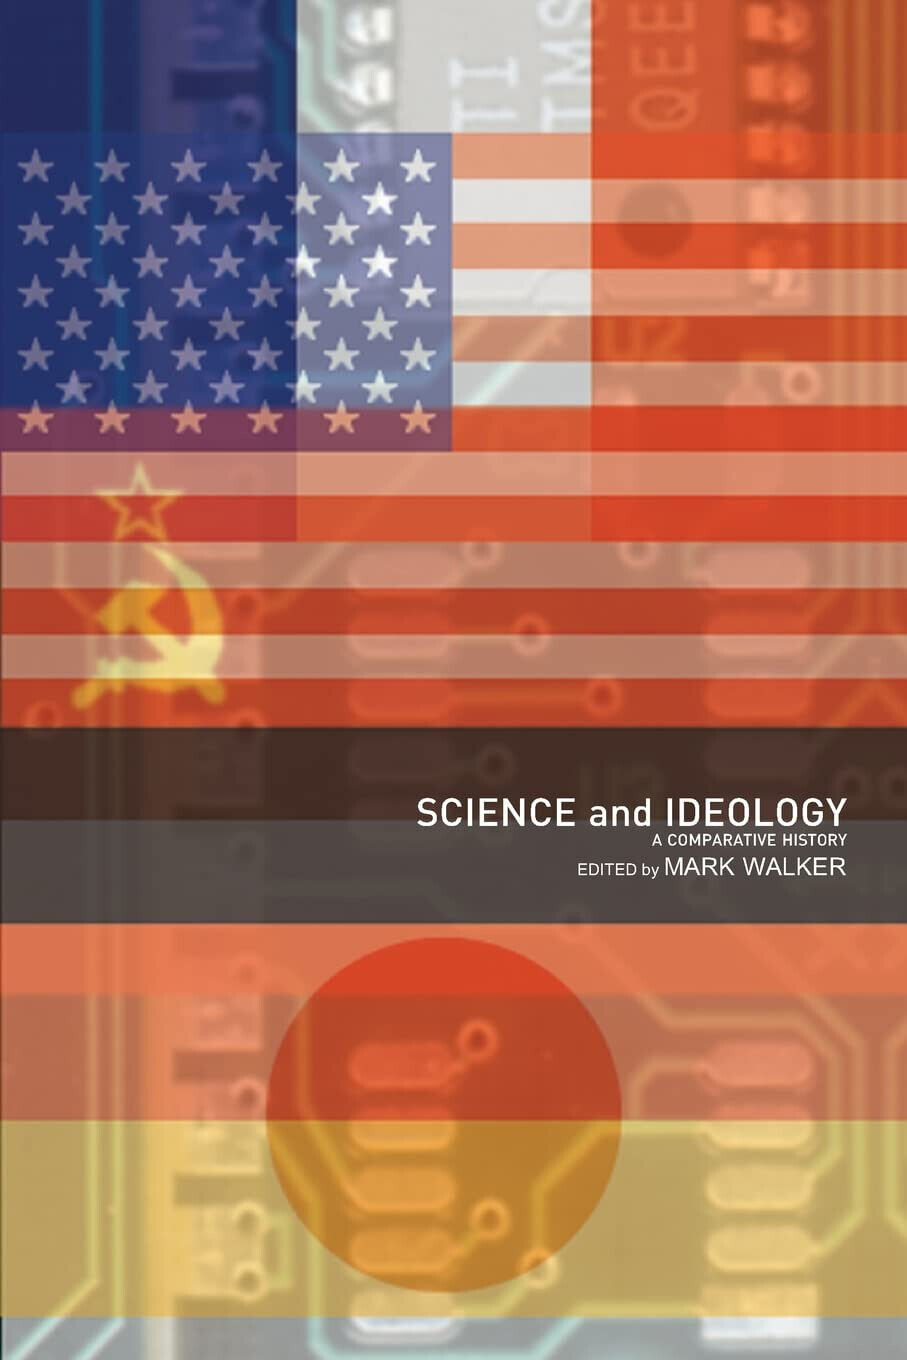 Science and Ideology - Mark Walker - Routledge, 2002 libro usato